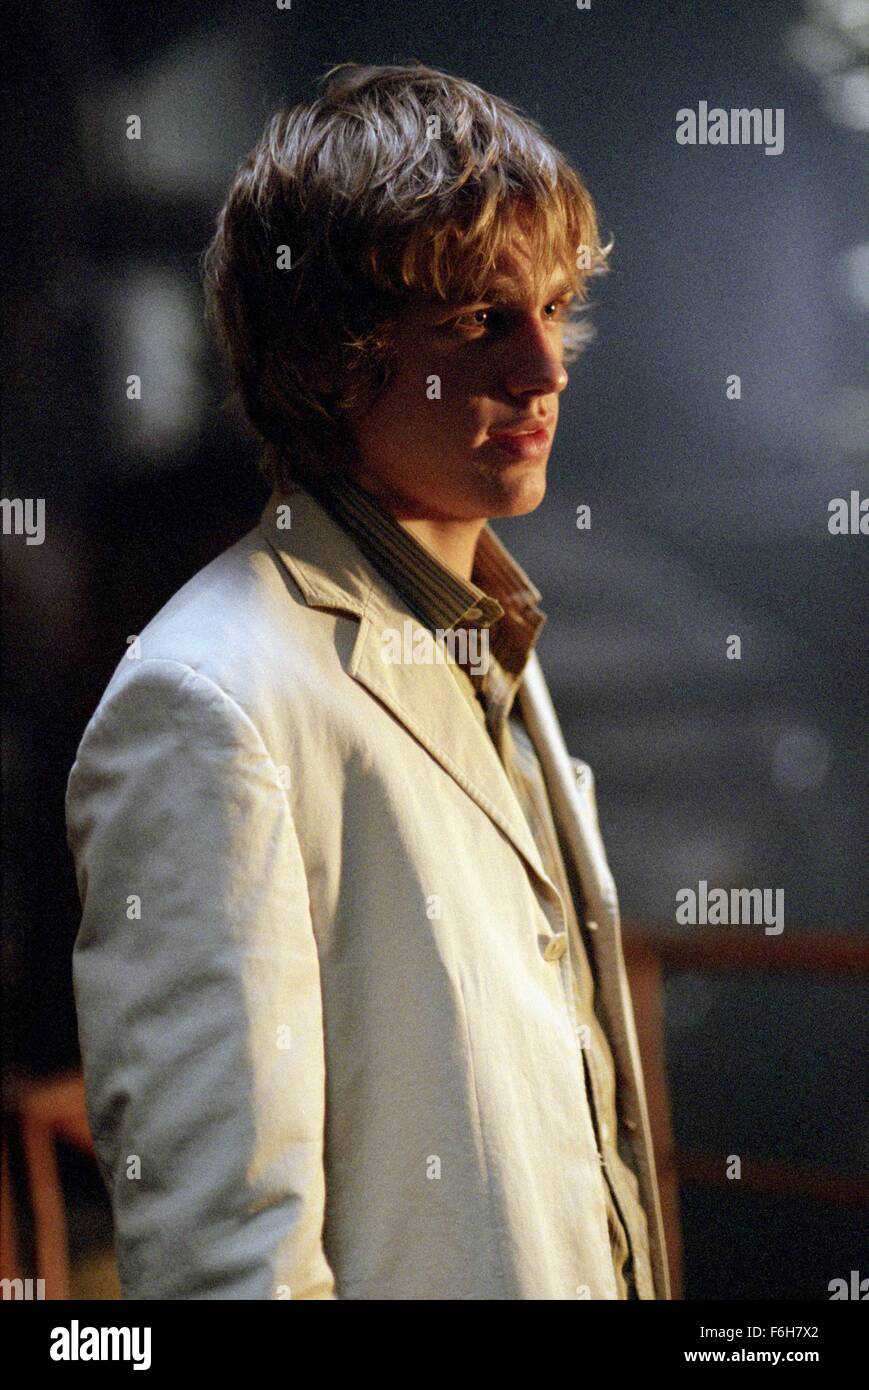 Jun 08, 2002; Hollywood, CA, USA; CHARLIE HUNNAM as Embry Larkin in the thriller, drama ''Abandon'' directed by Stephen Gaghan. Stock Photo